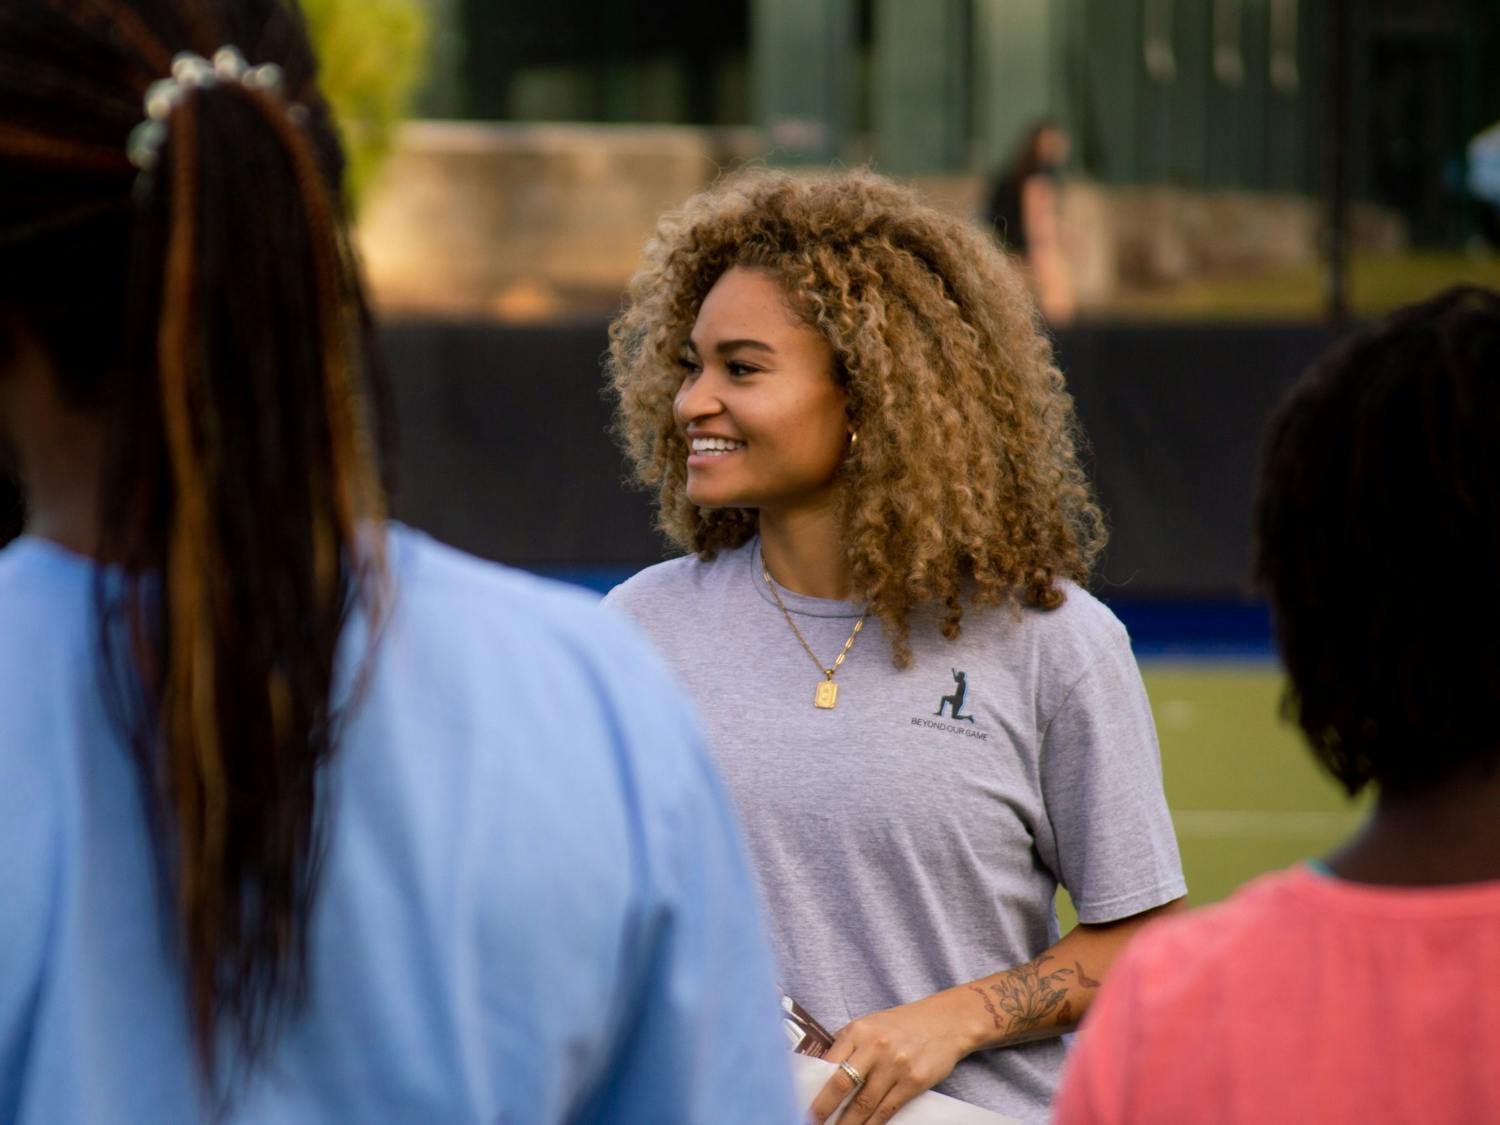 Courtnie Williamson, a former UNC Field HOckey player and organizer of the event, speaks at the "Evenin' Out The Playing Field" event on Saturday, Nov. 5, 2022.